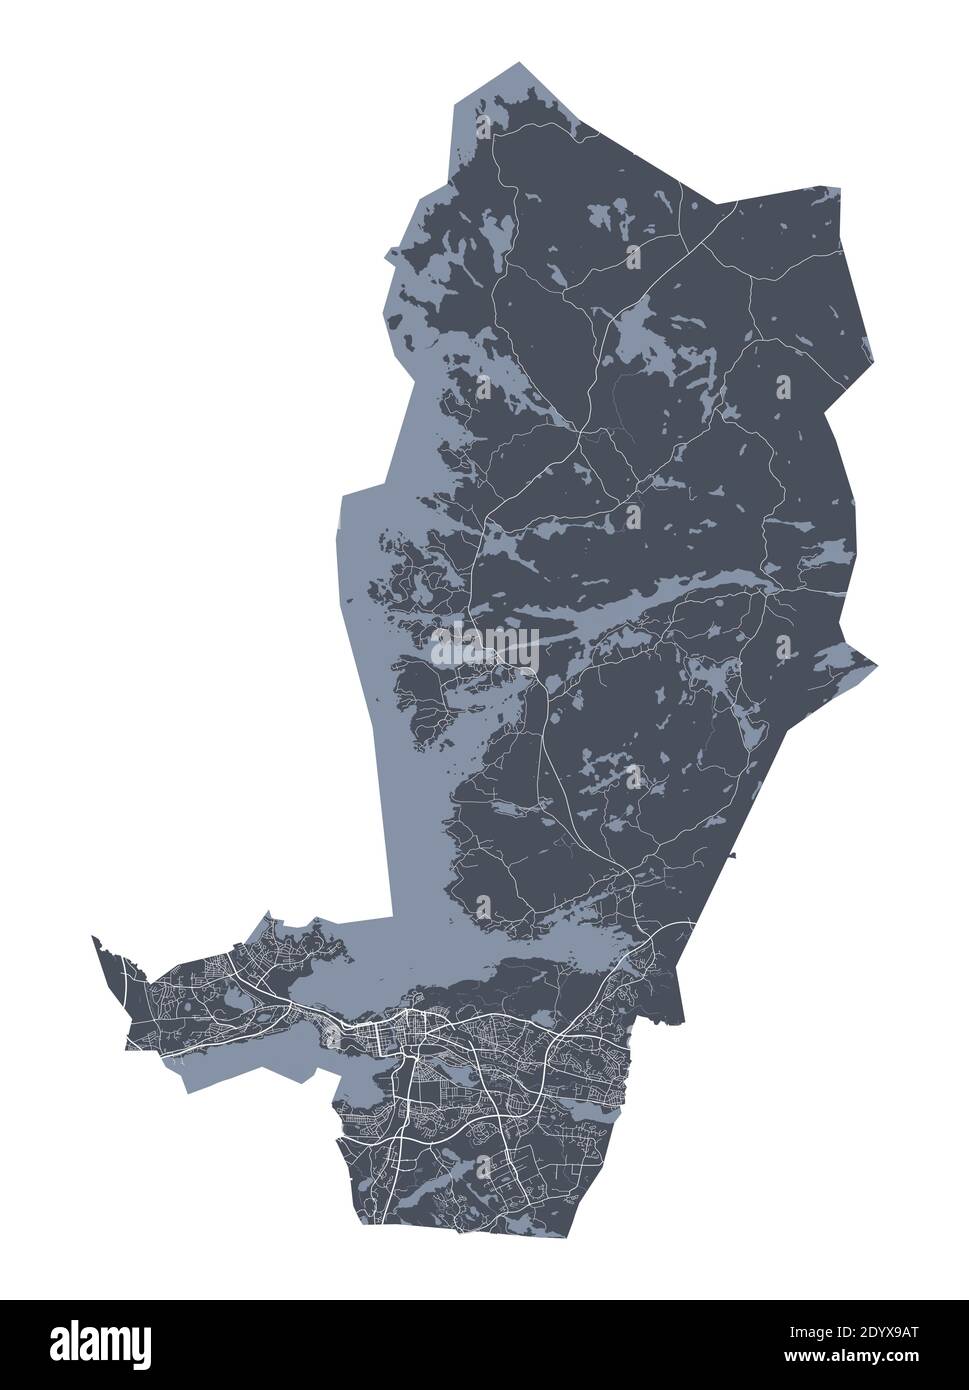 Tampere map. Detailed vector map of Tampere city administrative area. Cityscape poster metropolitan aria view. Dark land with white streets, roads and Stock Vector